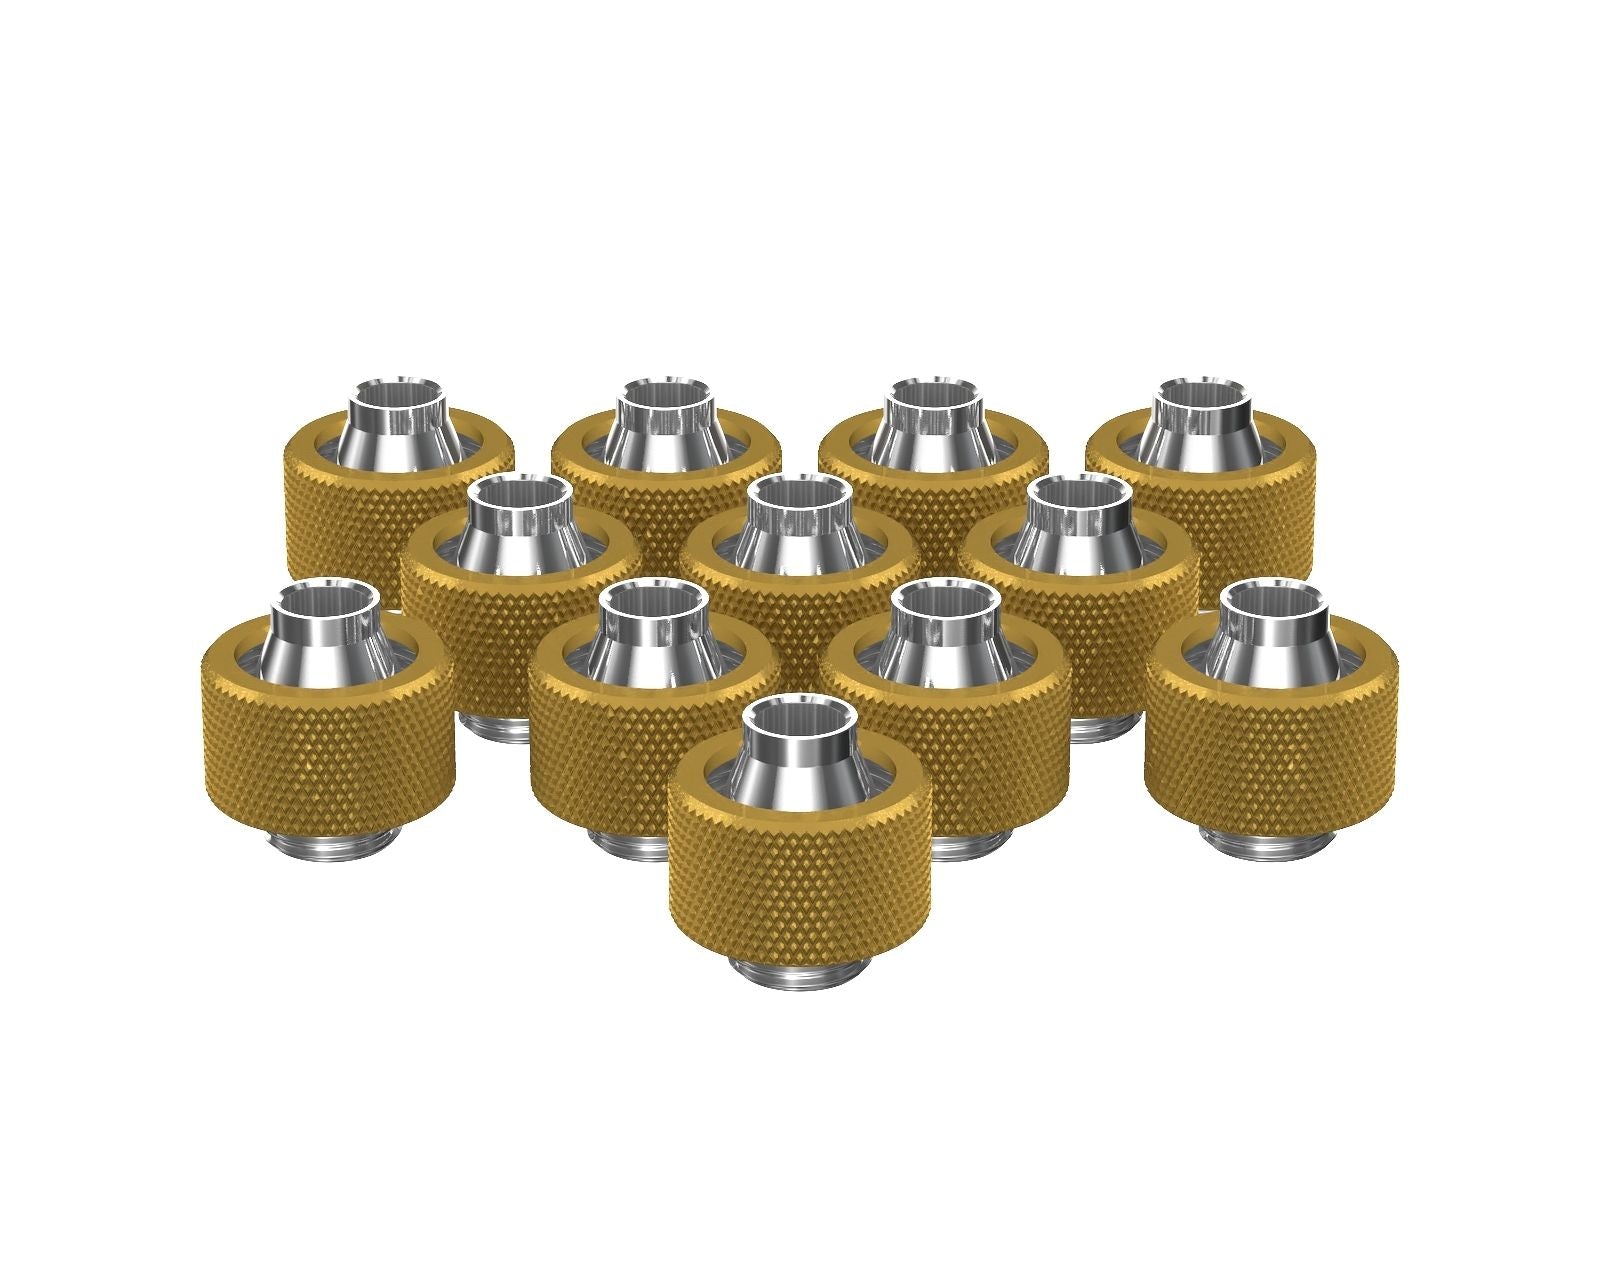 PrimoChill SecureFit SX - Premium Compression Fitting For 3/8in ID x 5/8in OD Flexible Tubing 12 Pack (F-SFSX58-12) - Available in 20+ Colors, Custom Watercooling Loop Ready - Gold